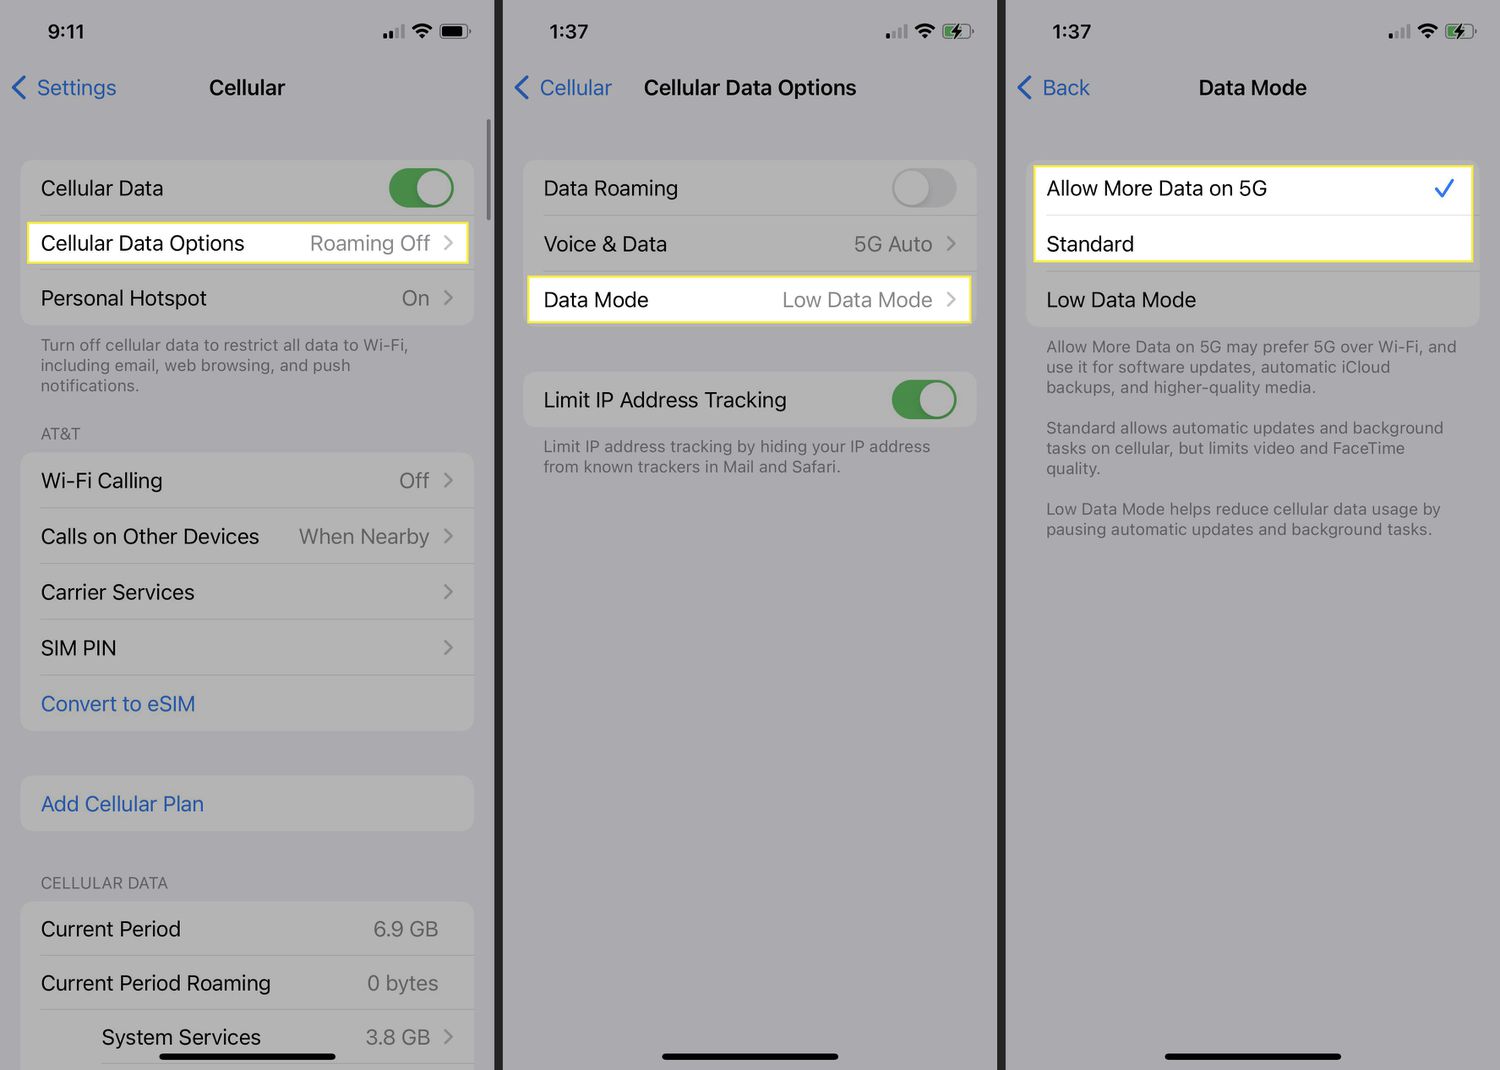 How to turn on low data mode for iOS devices